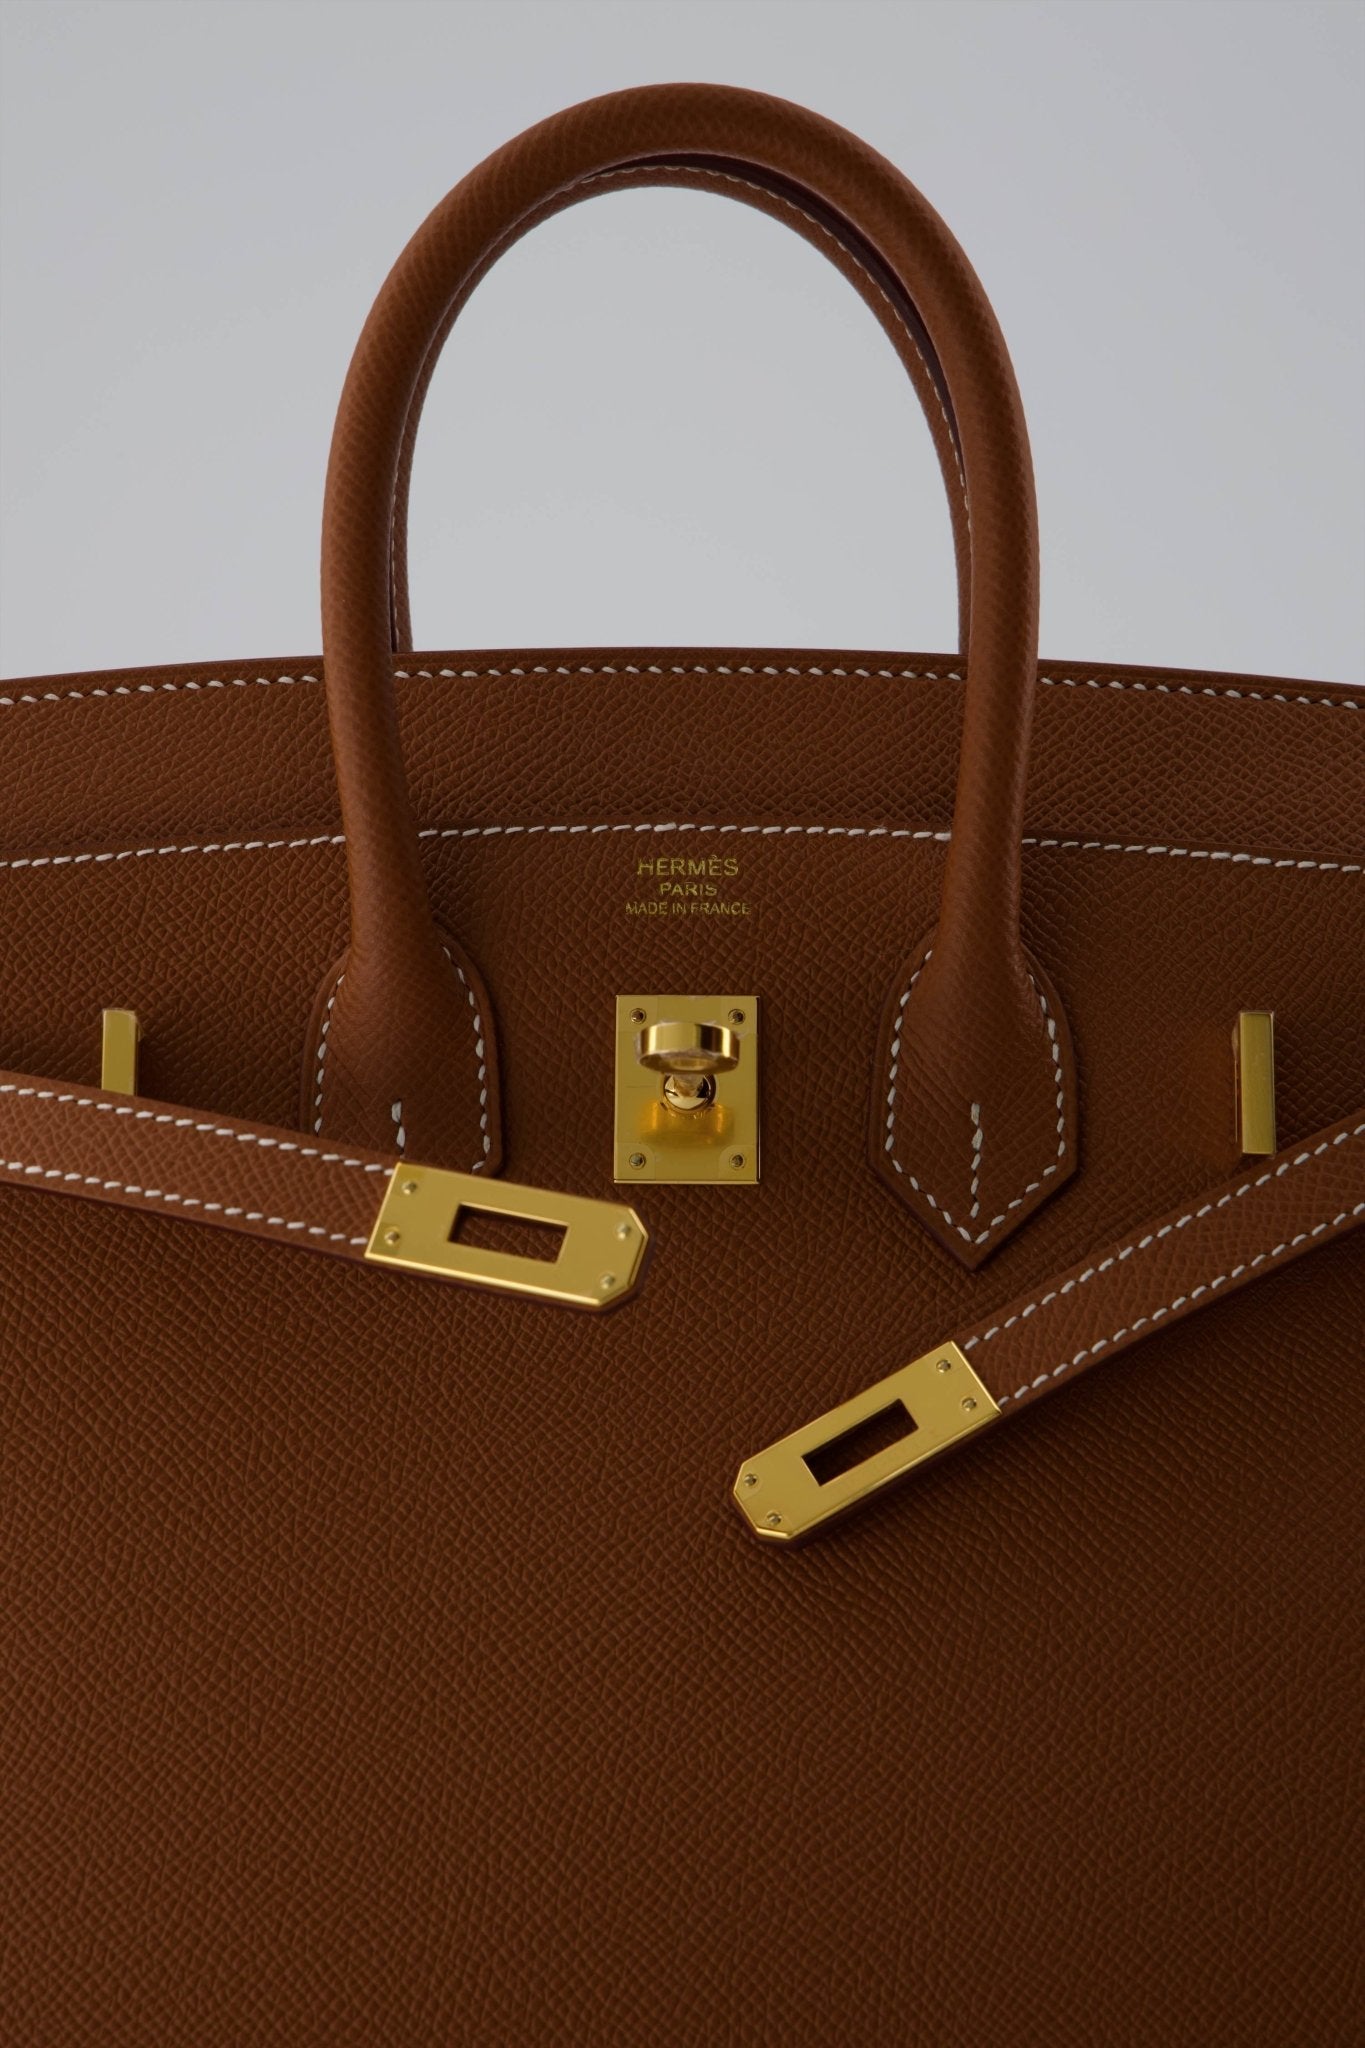 *Holy Grail* Hermes Birkin 25 Sellier Handbag Gold Epsom Leather With Gold Hardware. Investment Piece